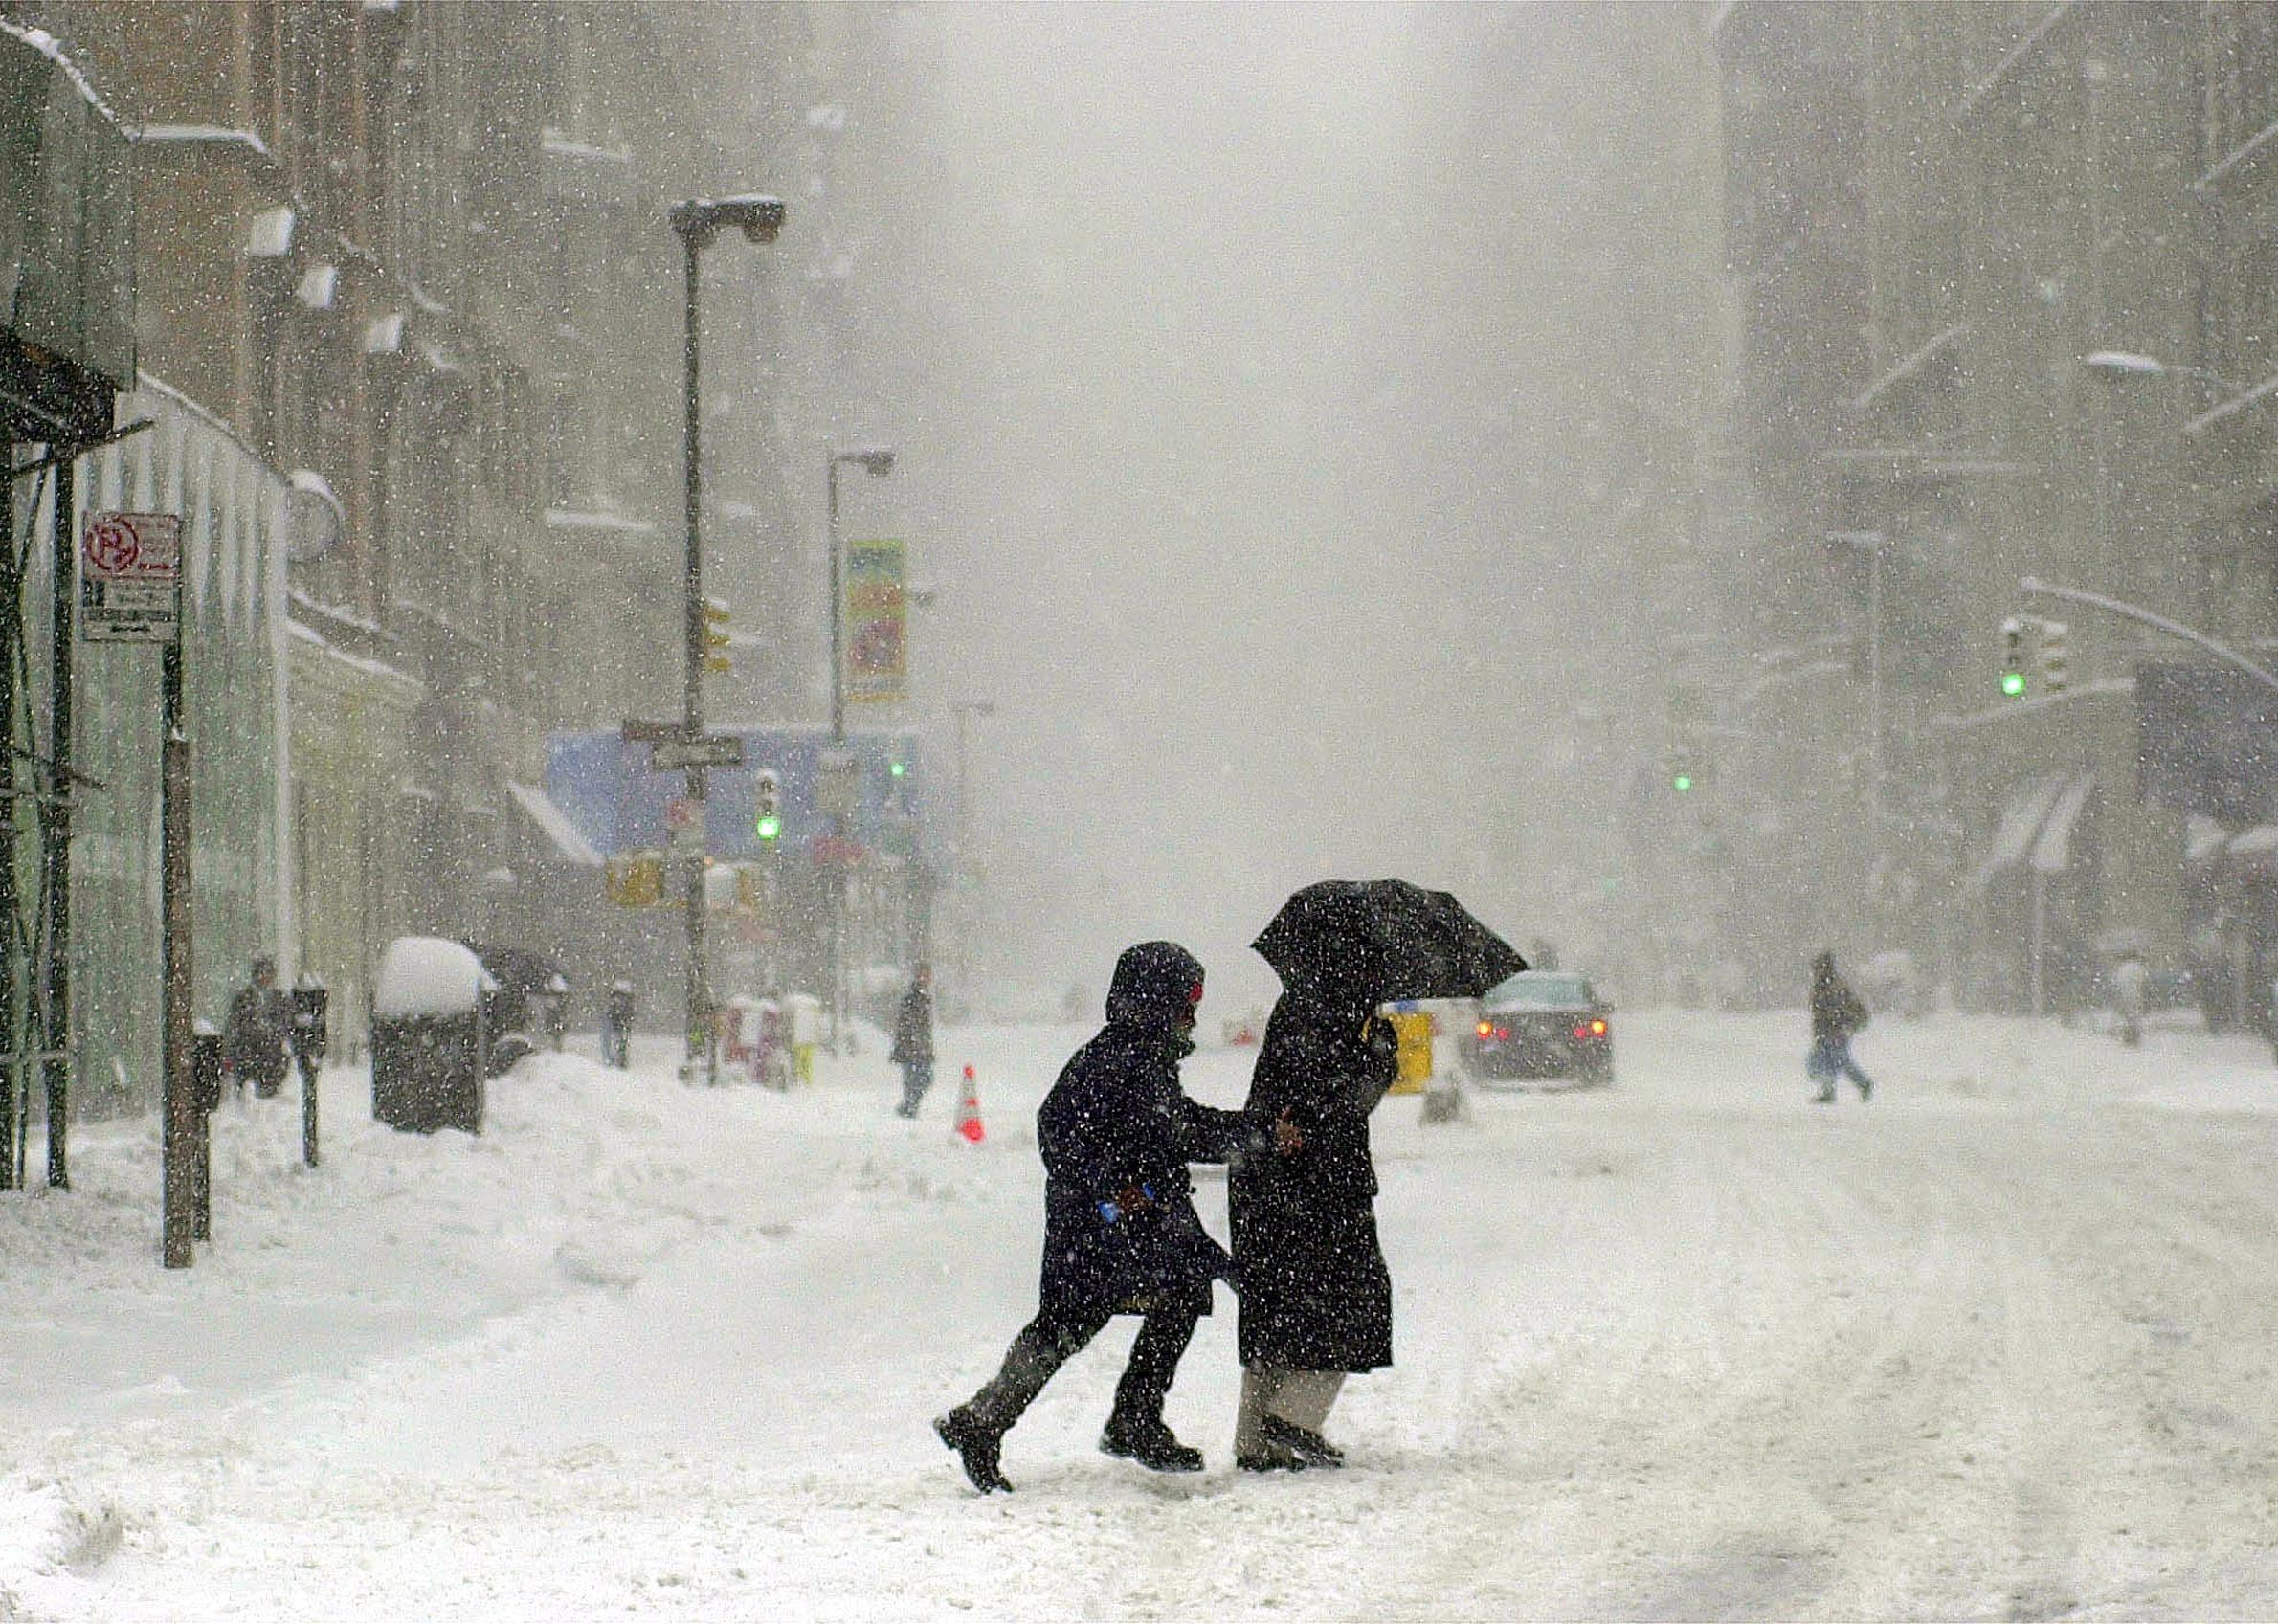 Two people make their way across a street with snow falling around.